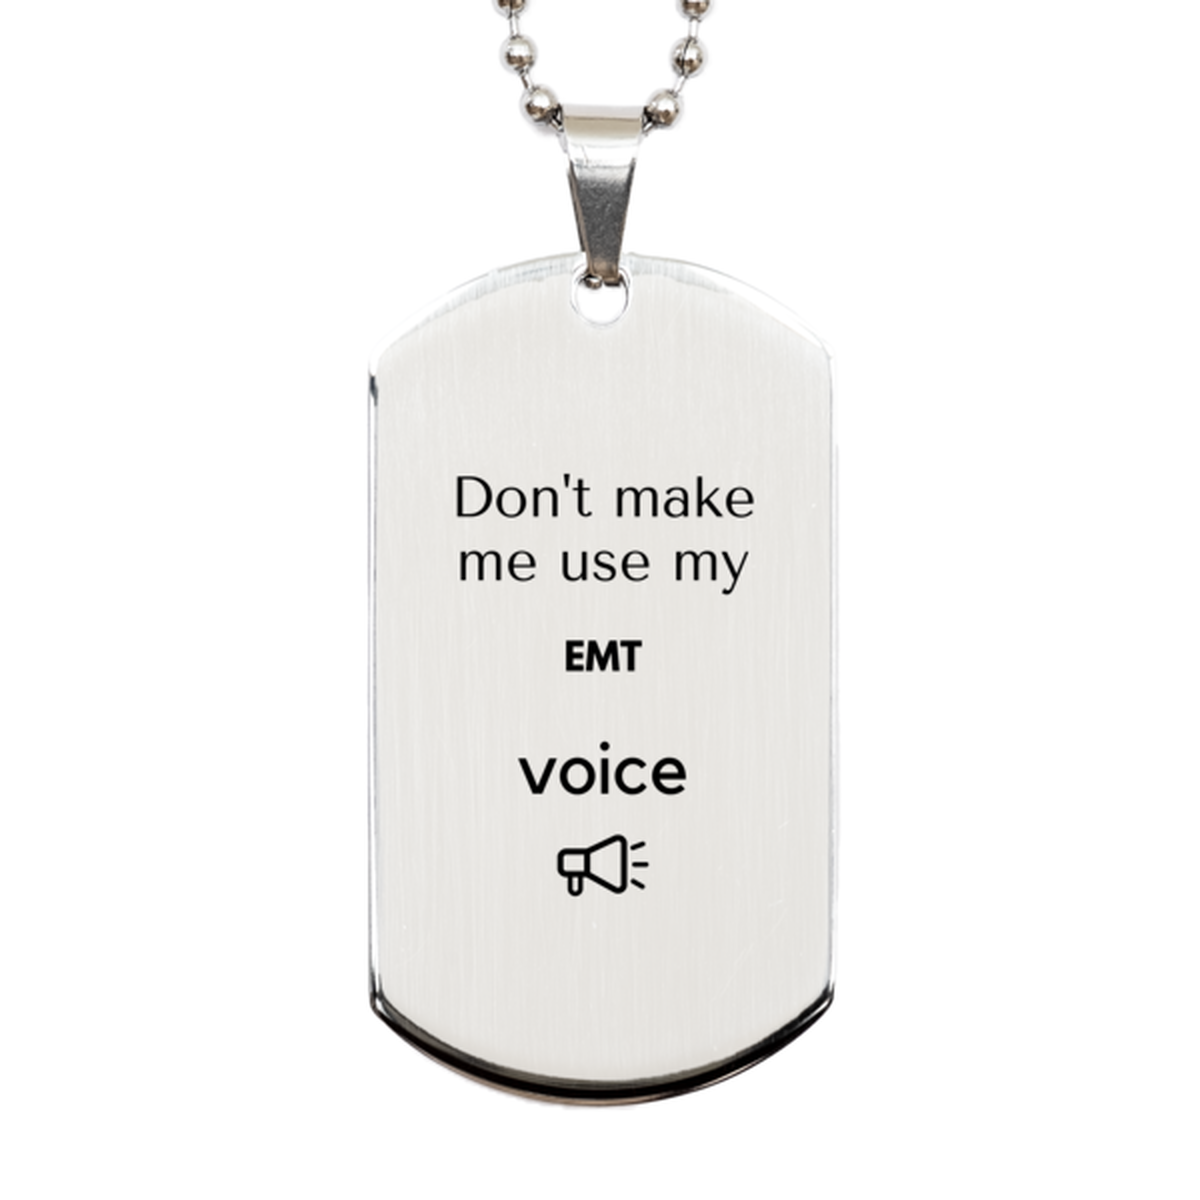 Don't make me use my EMT voice, Sarcasm EMT Gifts, Christmas EMT Silver Dog Tag Birthday Unique Gifts For EMT Coworkers, Men, Women, Colleague, Friends